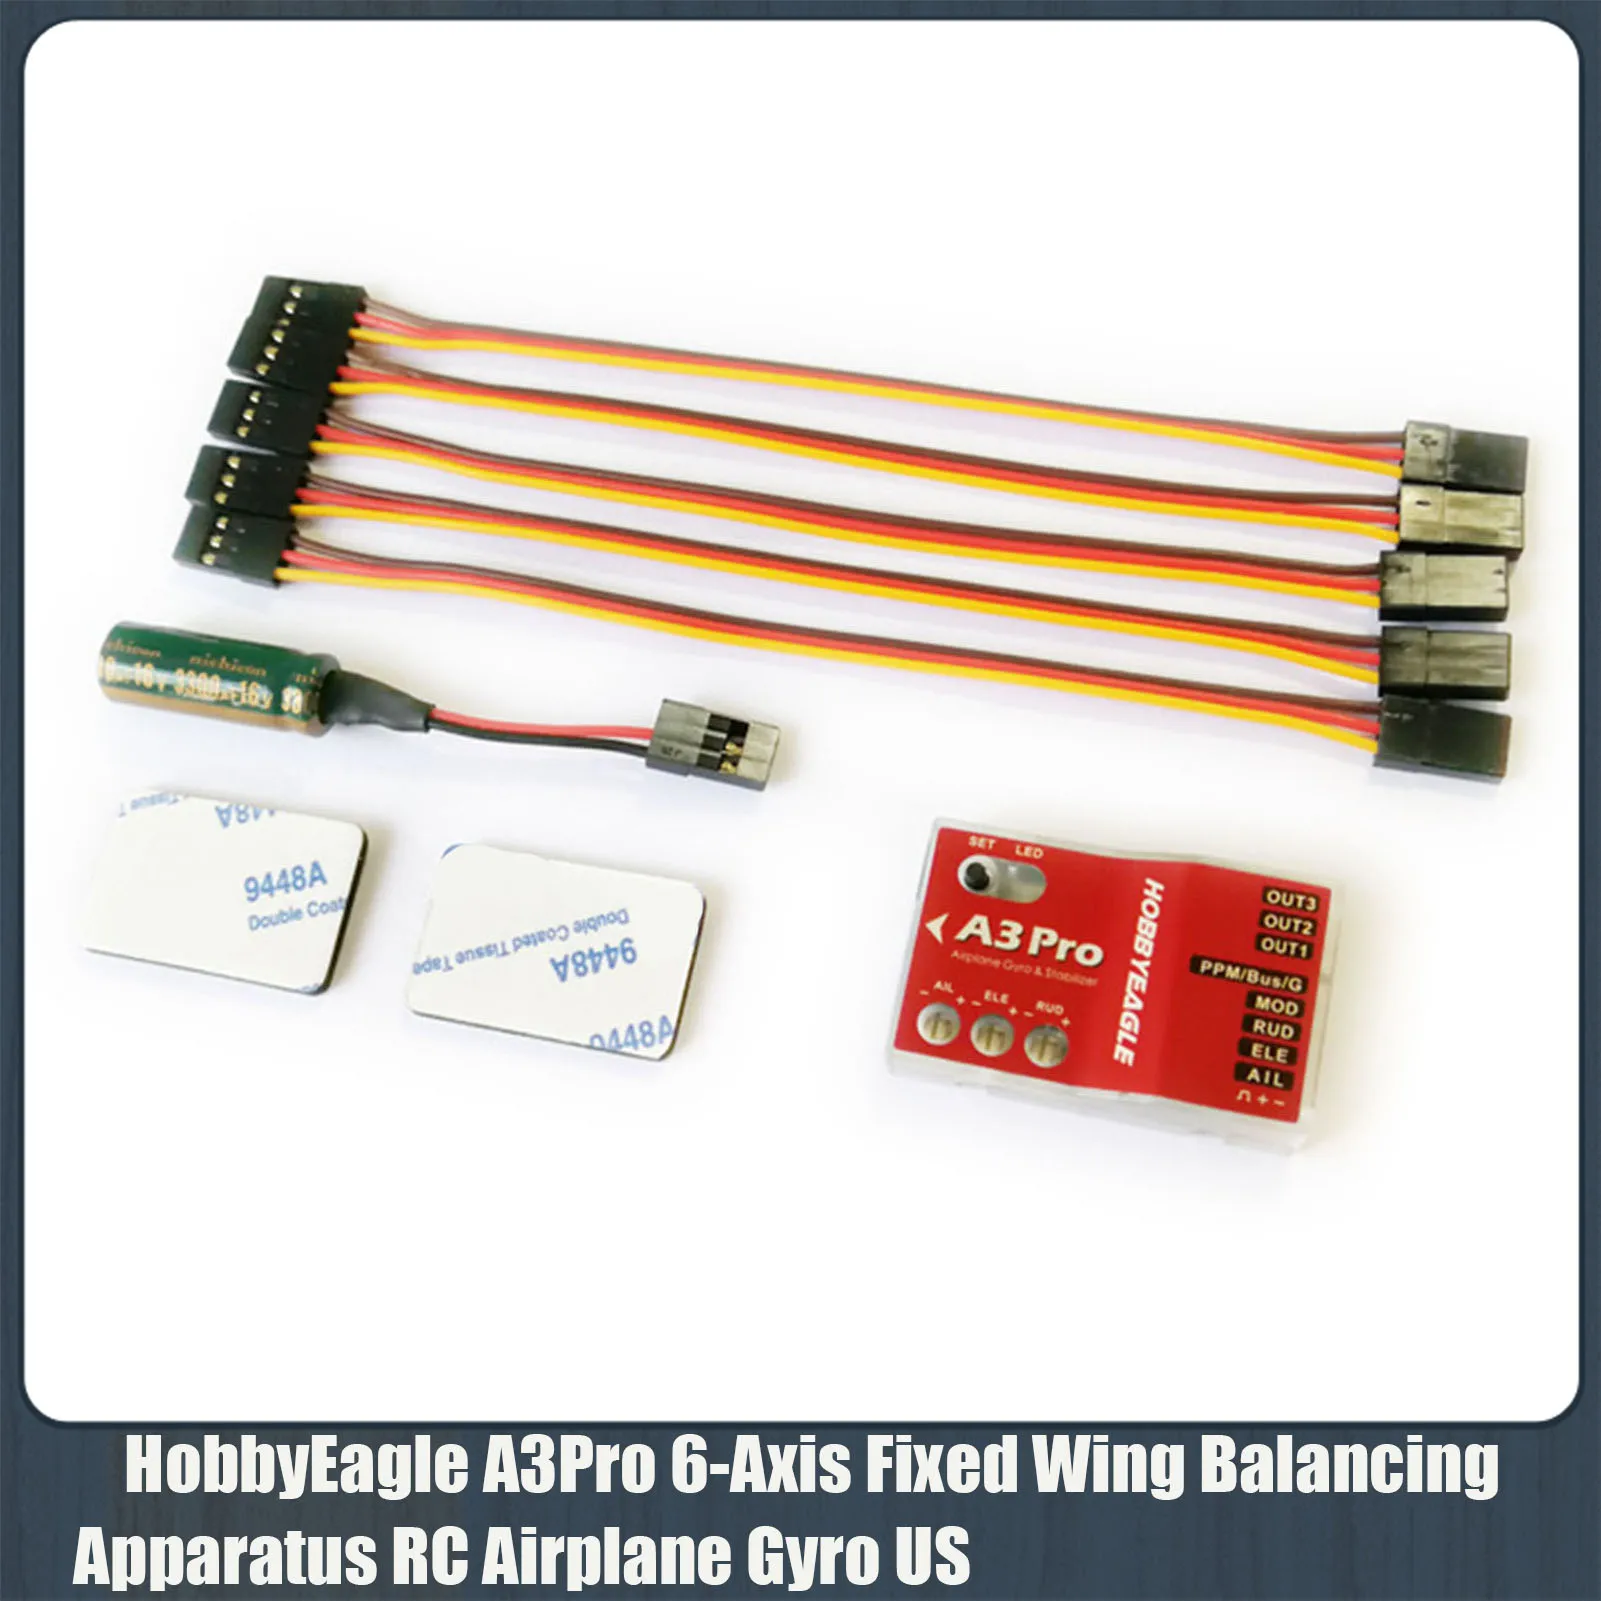 

A3 Pro 6-Axis Gyroscope Flight Control Balancing Apparatus airplane gyro stabilizer for Fixed Wing for RC airplanes